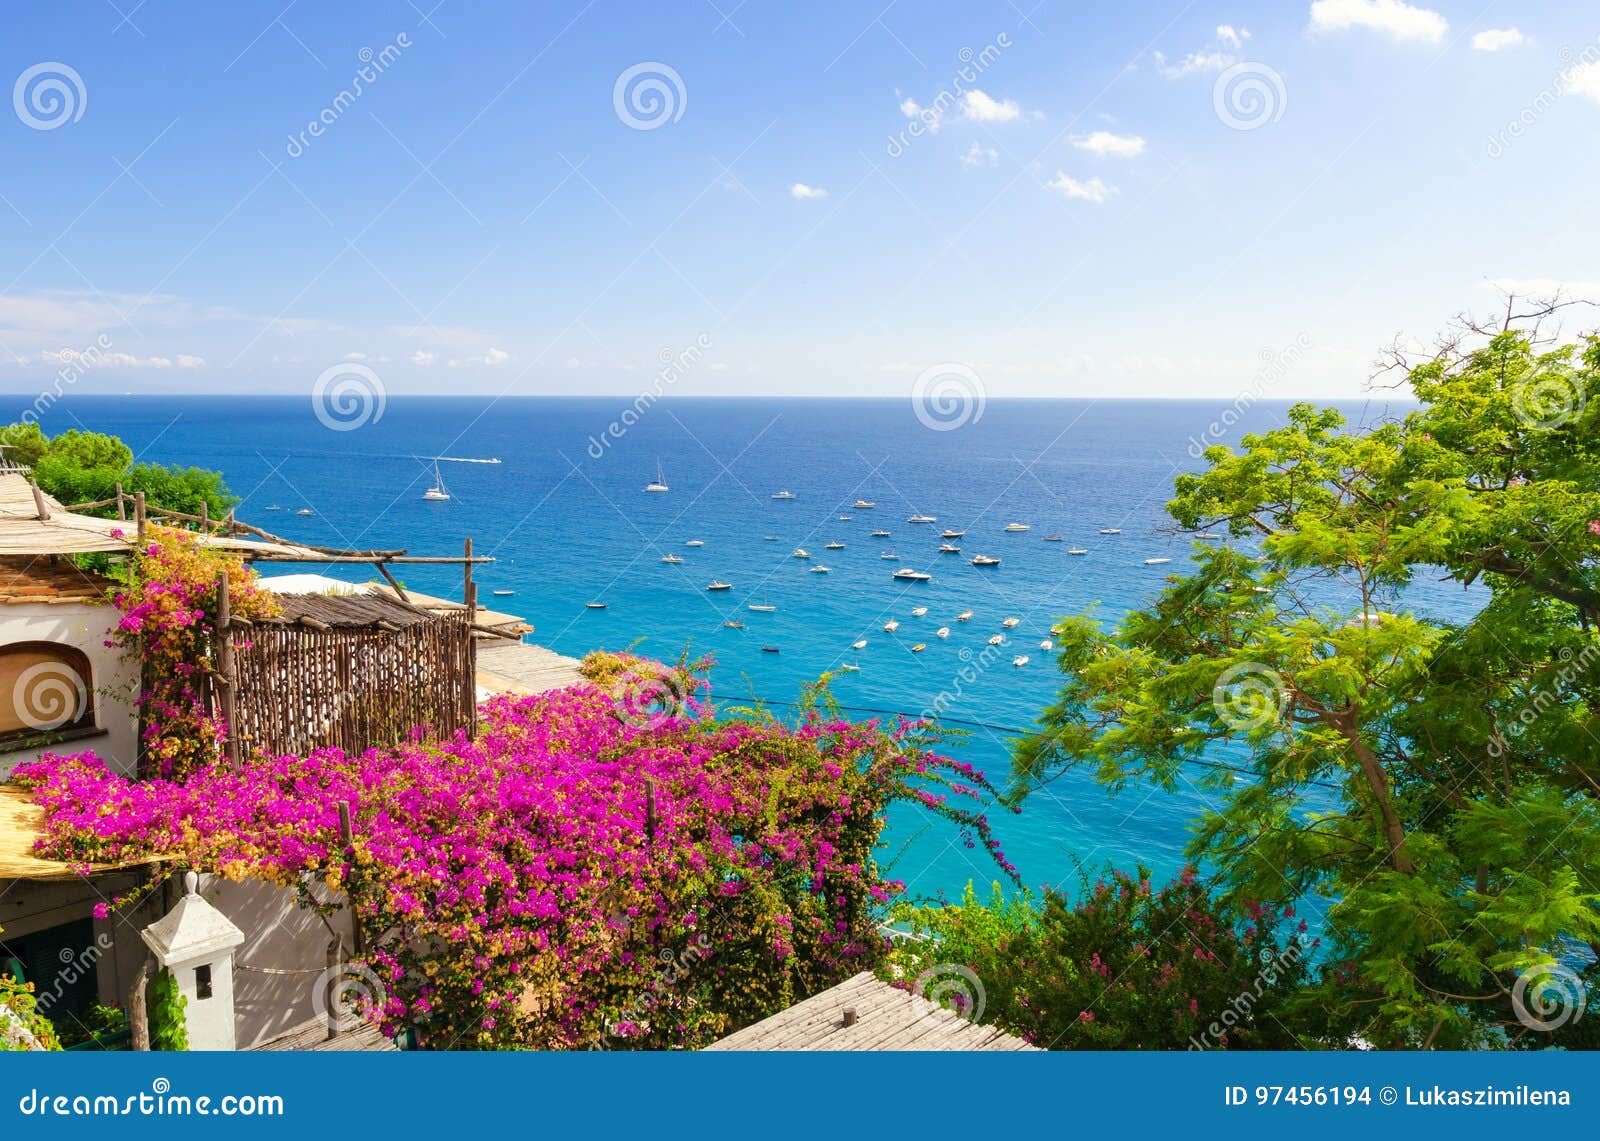 Beautiful View Of The Colorful Houses And Mediterranean Sea In